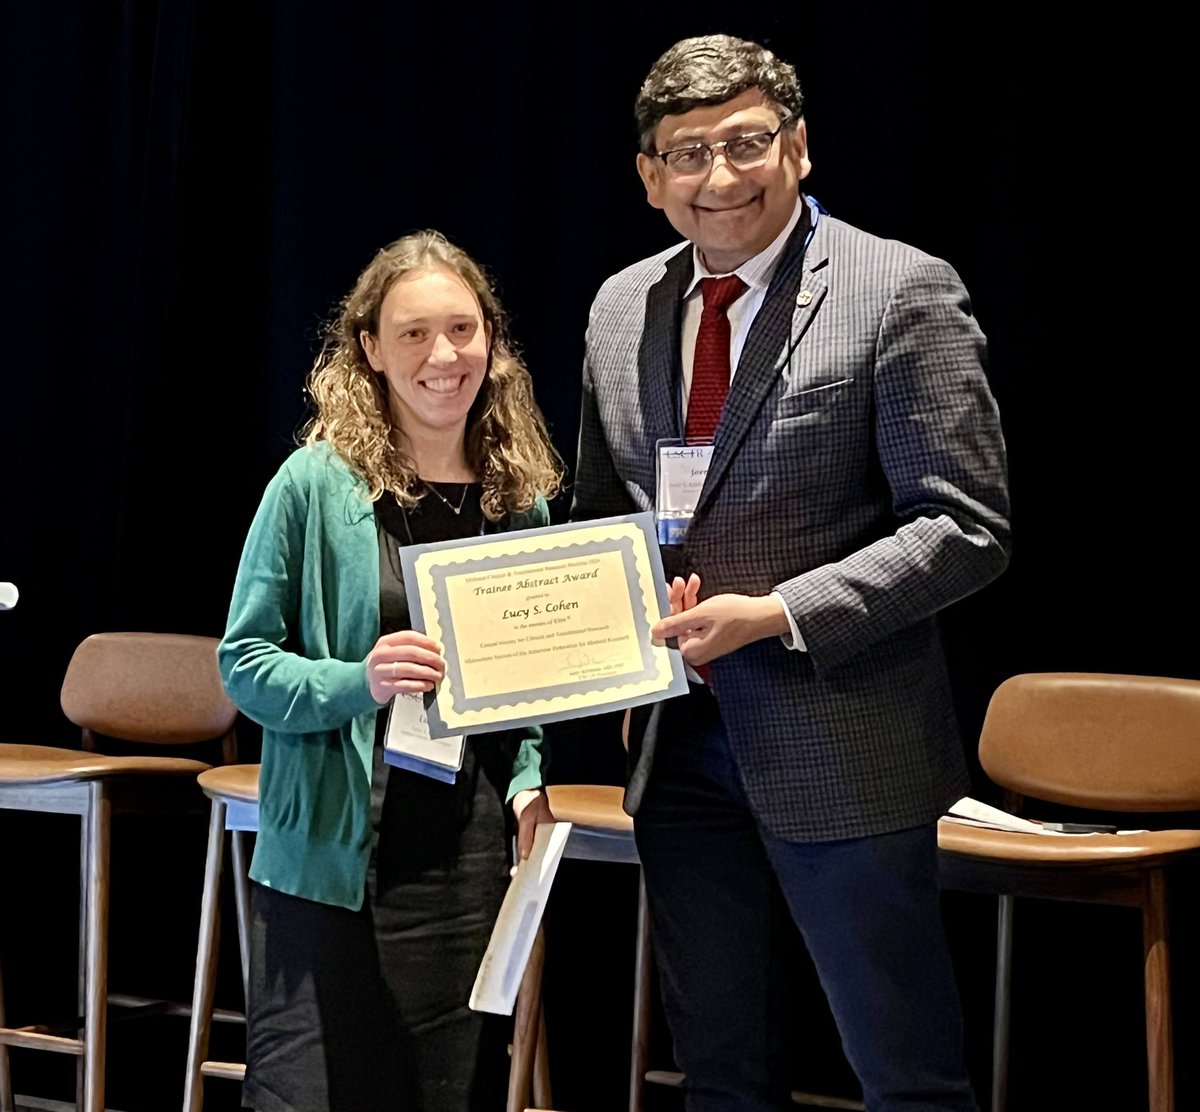 Special congrats to Lucy Cohen for her trainee abstract award at the Midwest Clinical and Translational Research Conference! @AFMResearch @CSCTR_org @WUSTLPCCM